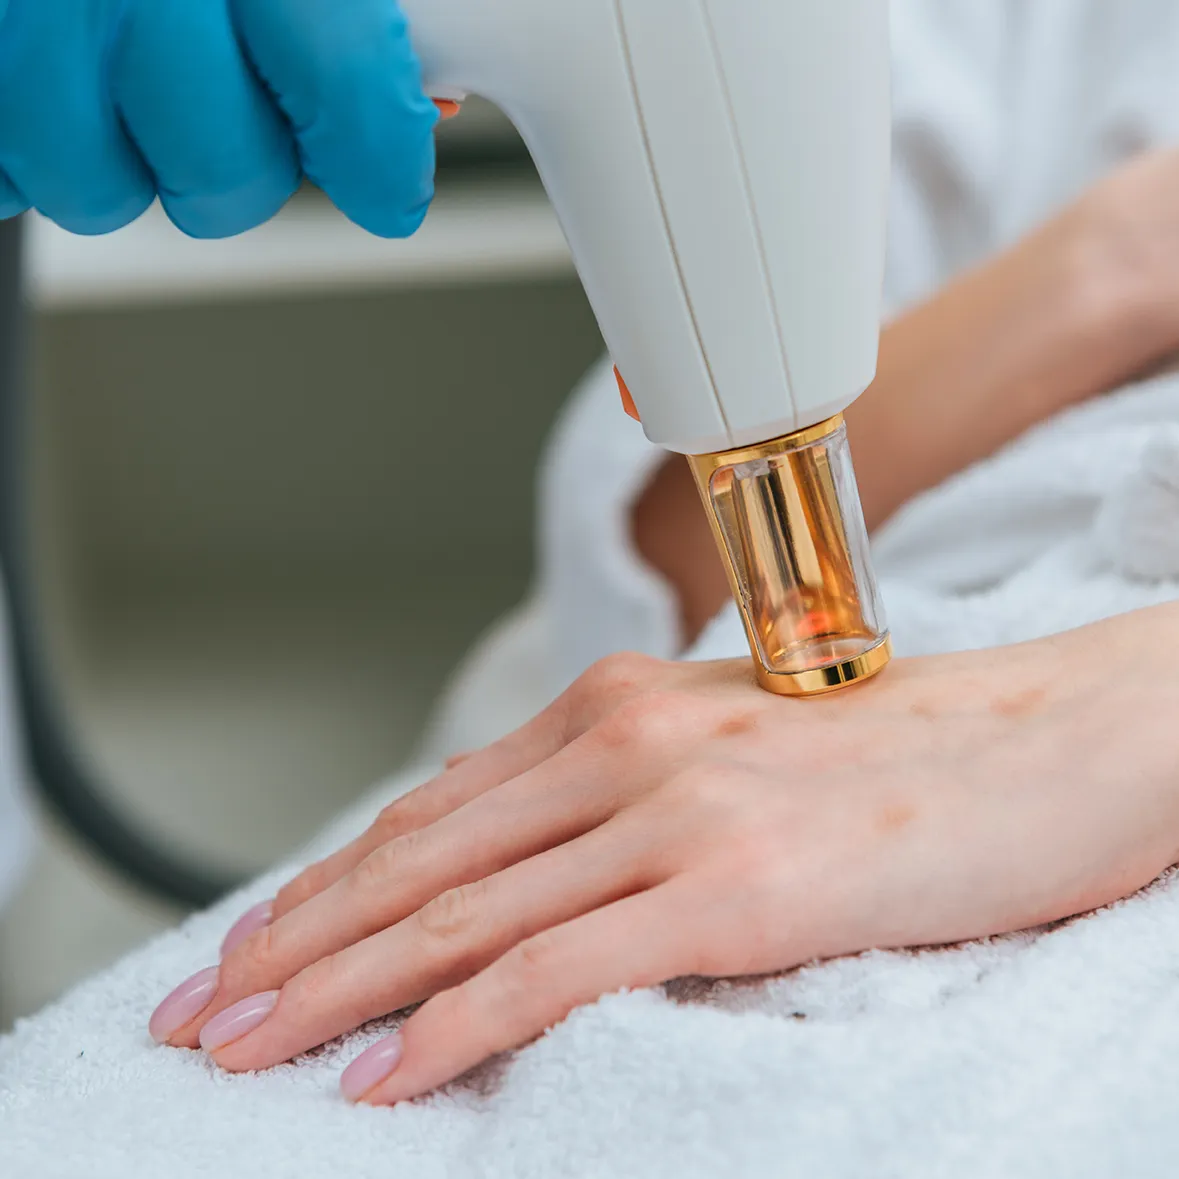 A hand is undergoing a laser treatment. The hand is resting on a white towel, and a medical professional wearing blue gloves is holding a laser device aimed at the back of the hand. The scene appears to be in a clinical or spa setting.